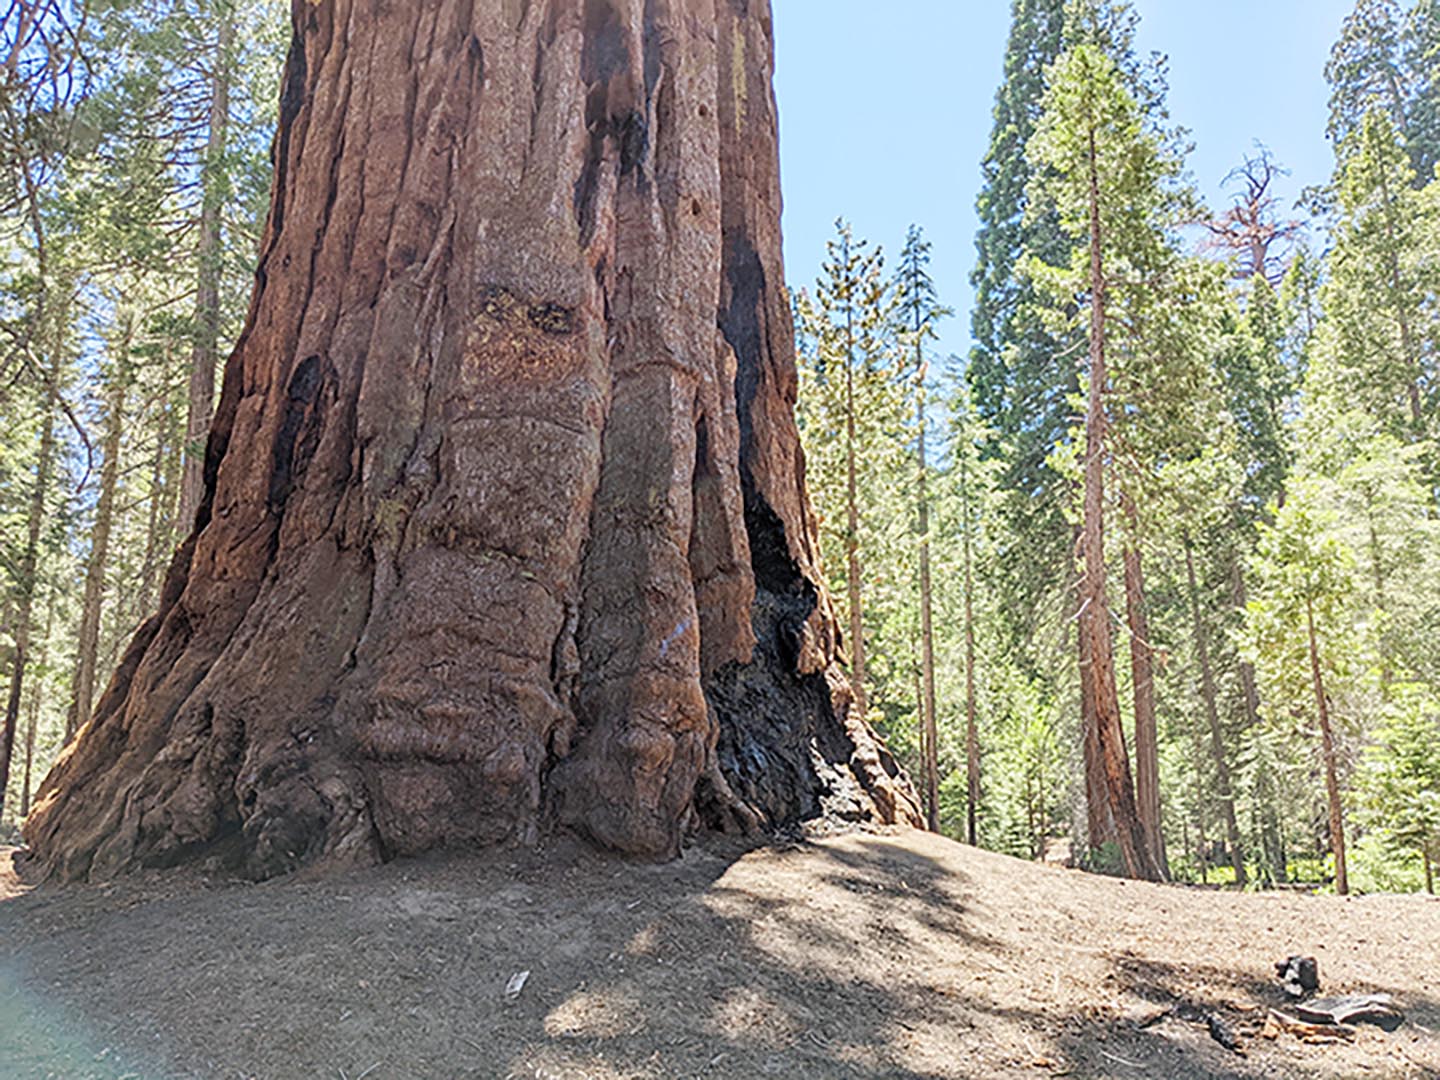 A monarch giant sequoia at Trail of 100 Giants, Giant Sequoia National Monument, July 2022. — Photo by Claudia Elliott